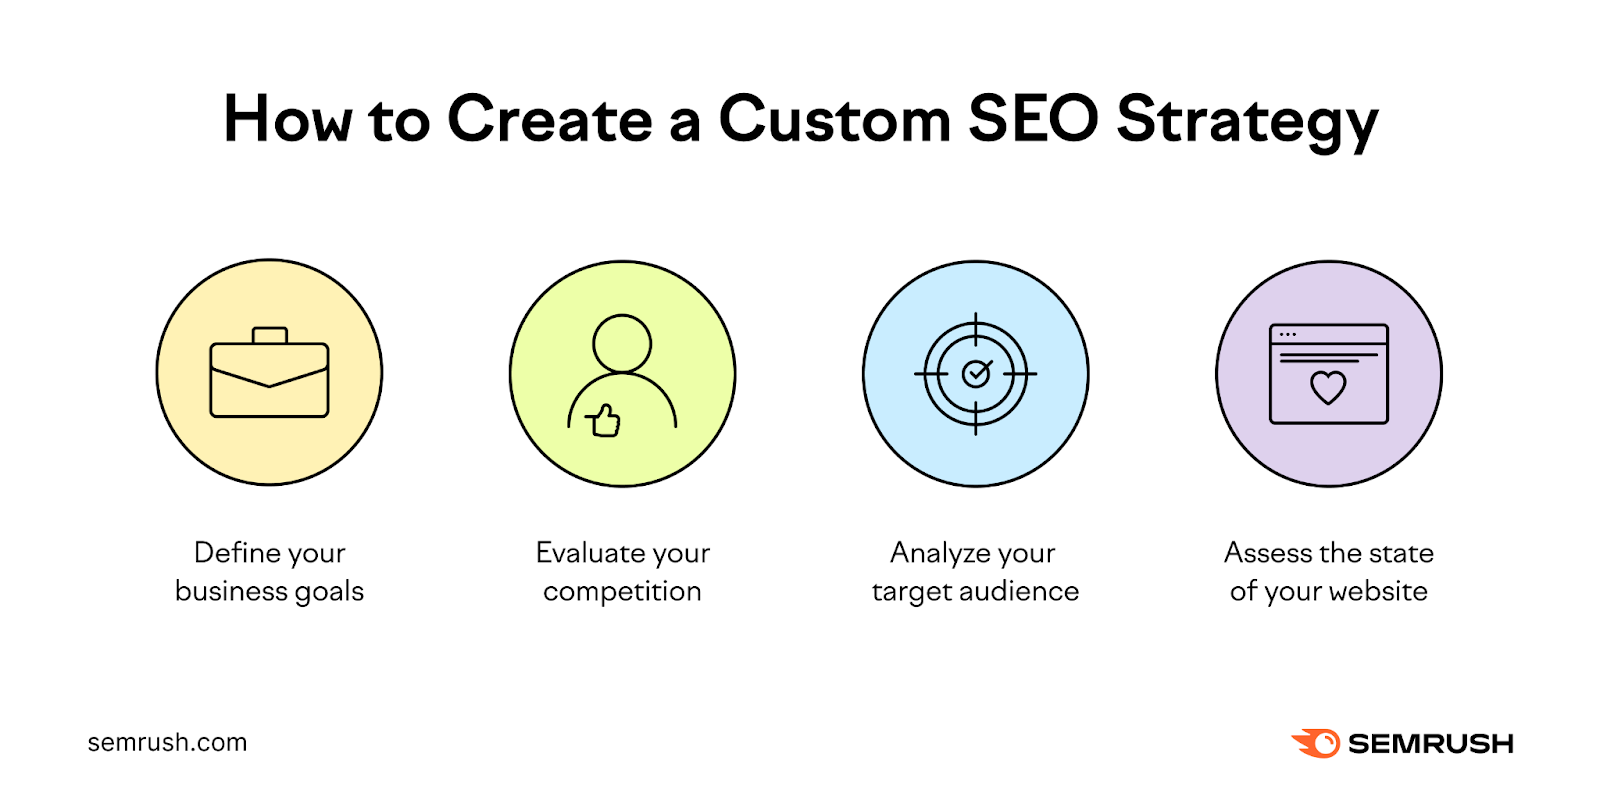 An infographic by Semrush on how to create a custom SEO strategy